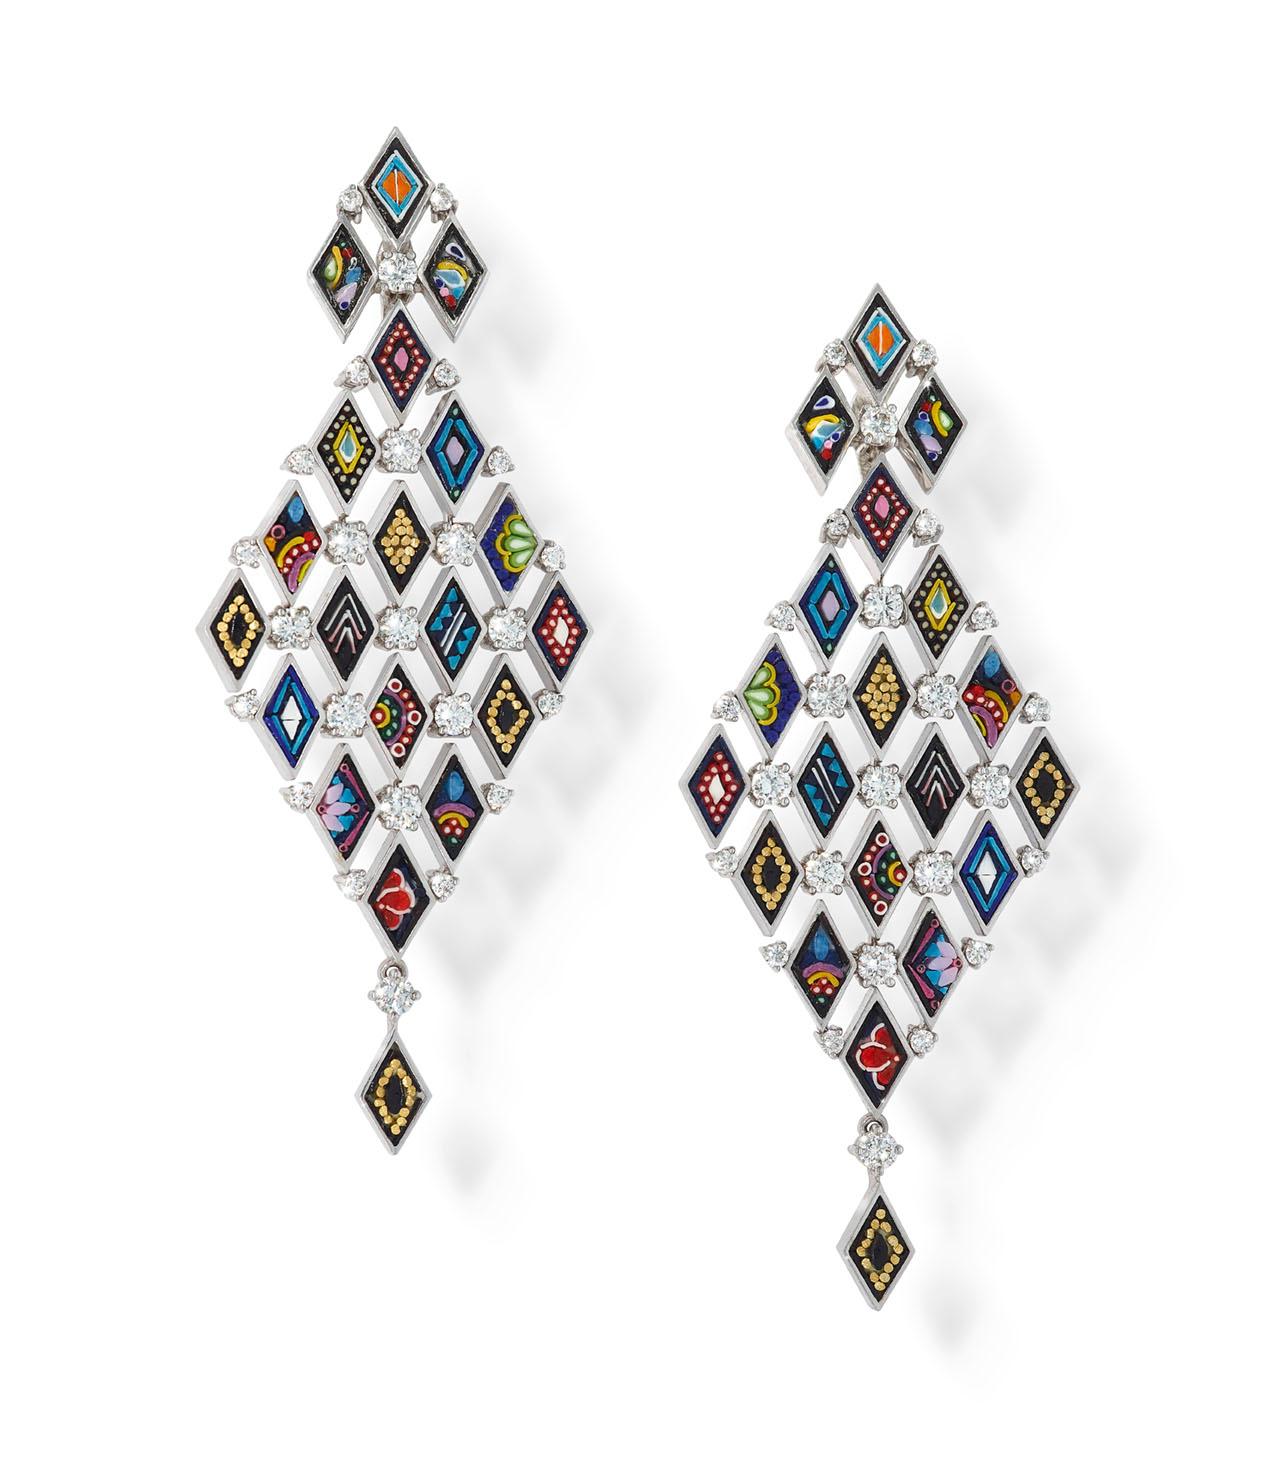 Micro Mosaic artists tiny handwoven Venetian enamel rods obtained from the high temperature melting of nine base colors with diamond dust, realizing endless combinations of tones and nuances. The rods are then broken into thousands of precious